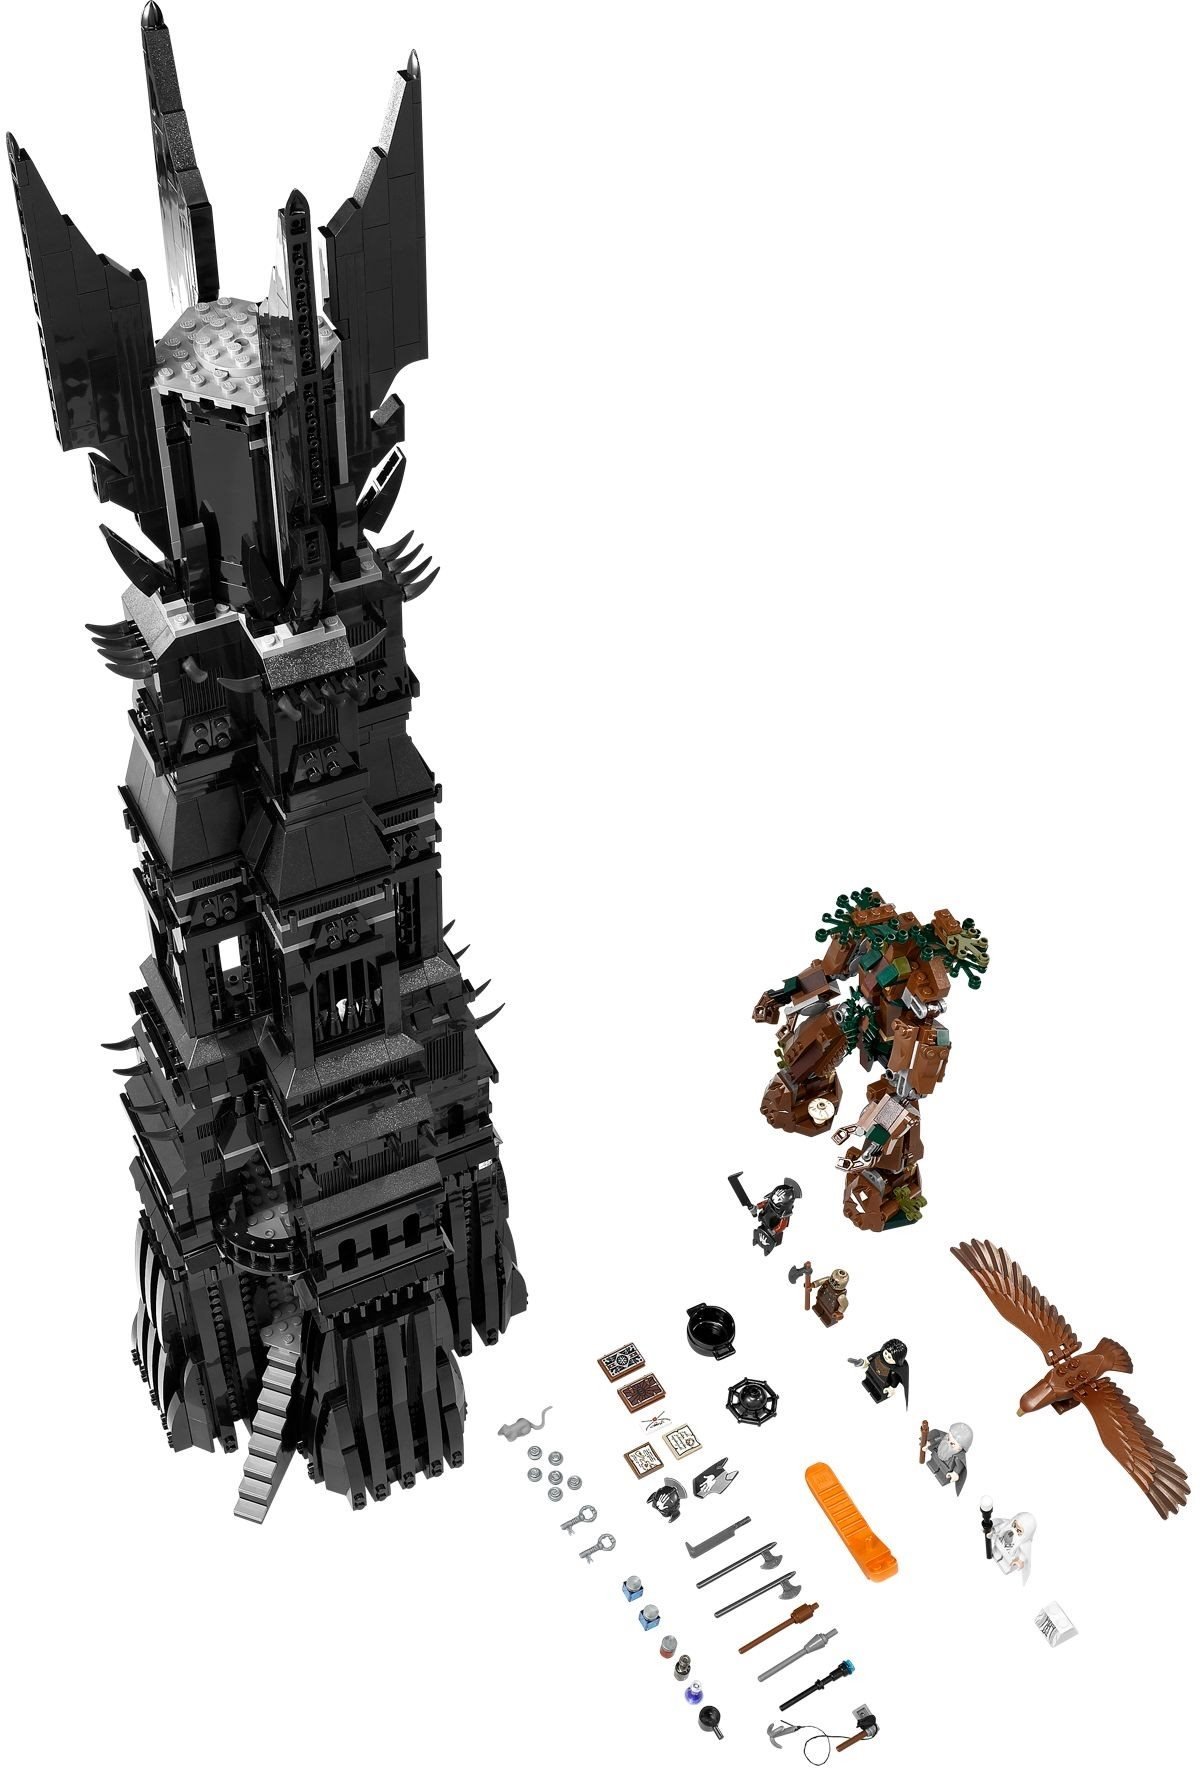 Orthanc from Lord of the Rings : r/Minecraftbuilds